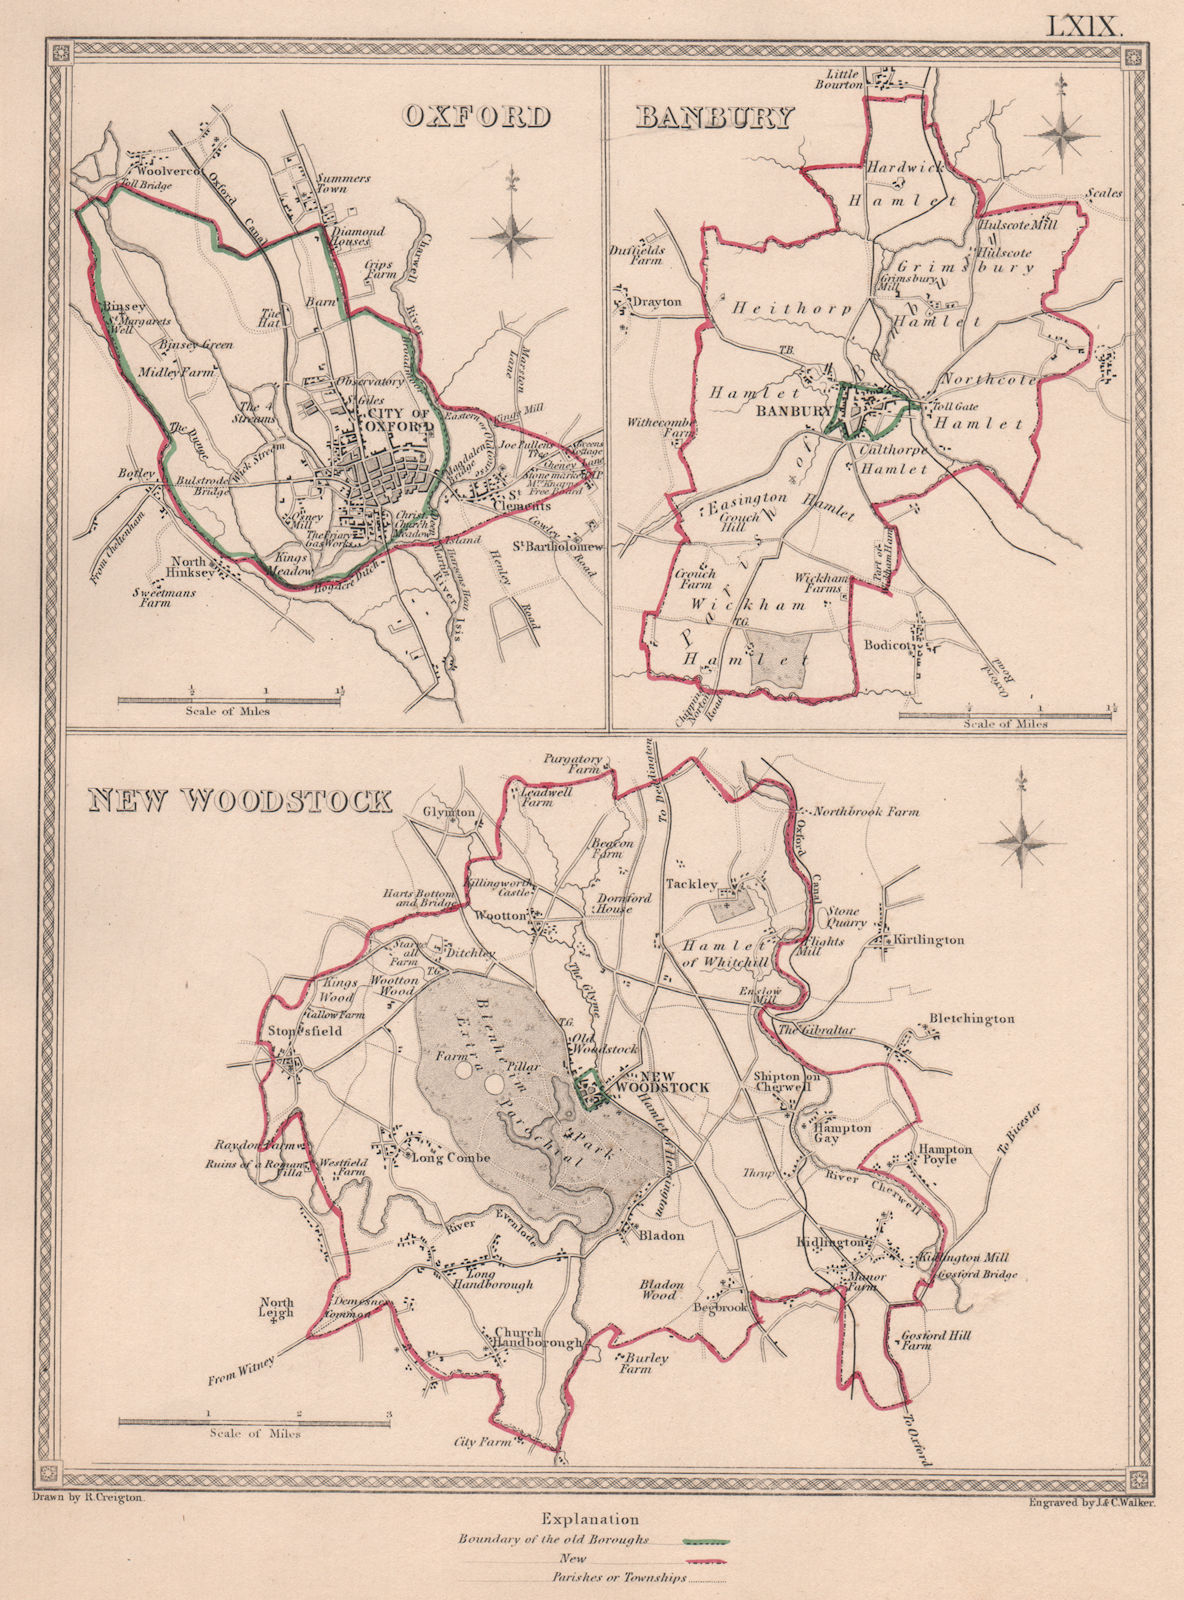 Associate Product OXFORDSHIRE TOWNS. Oxford Banbury New Woodstock plans.CREIGHTON/WALKER 1835 map